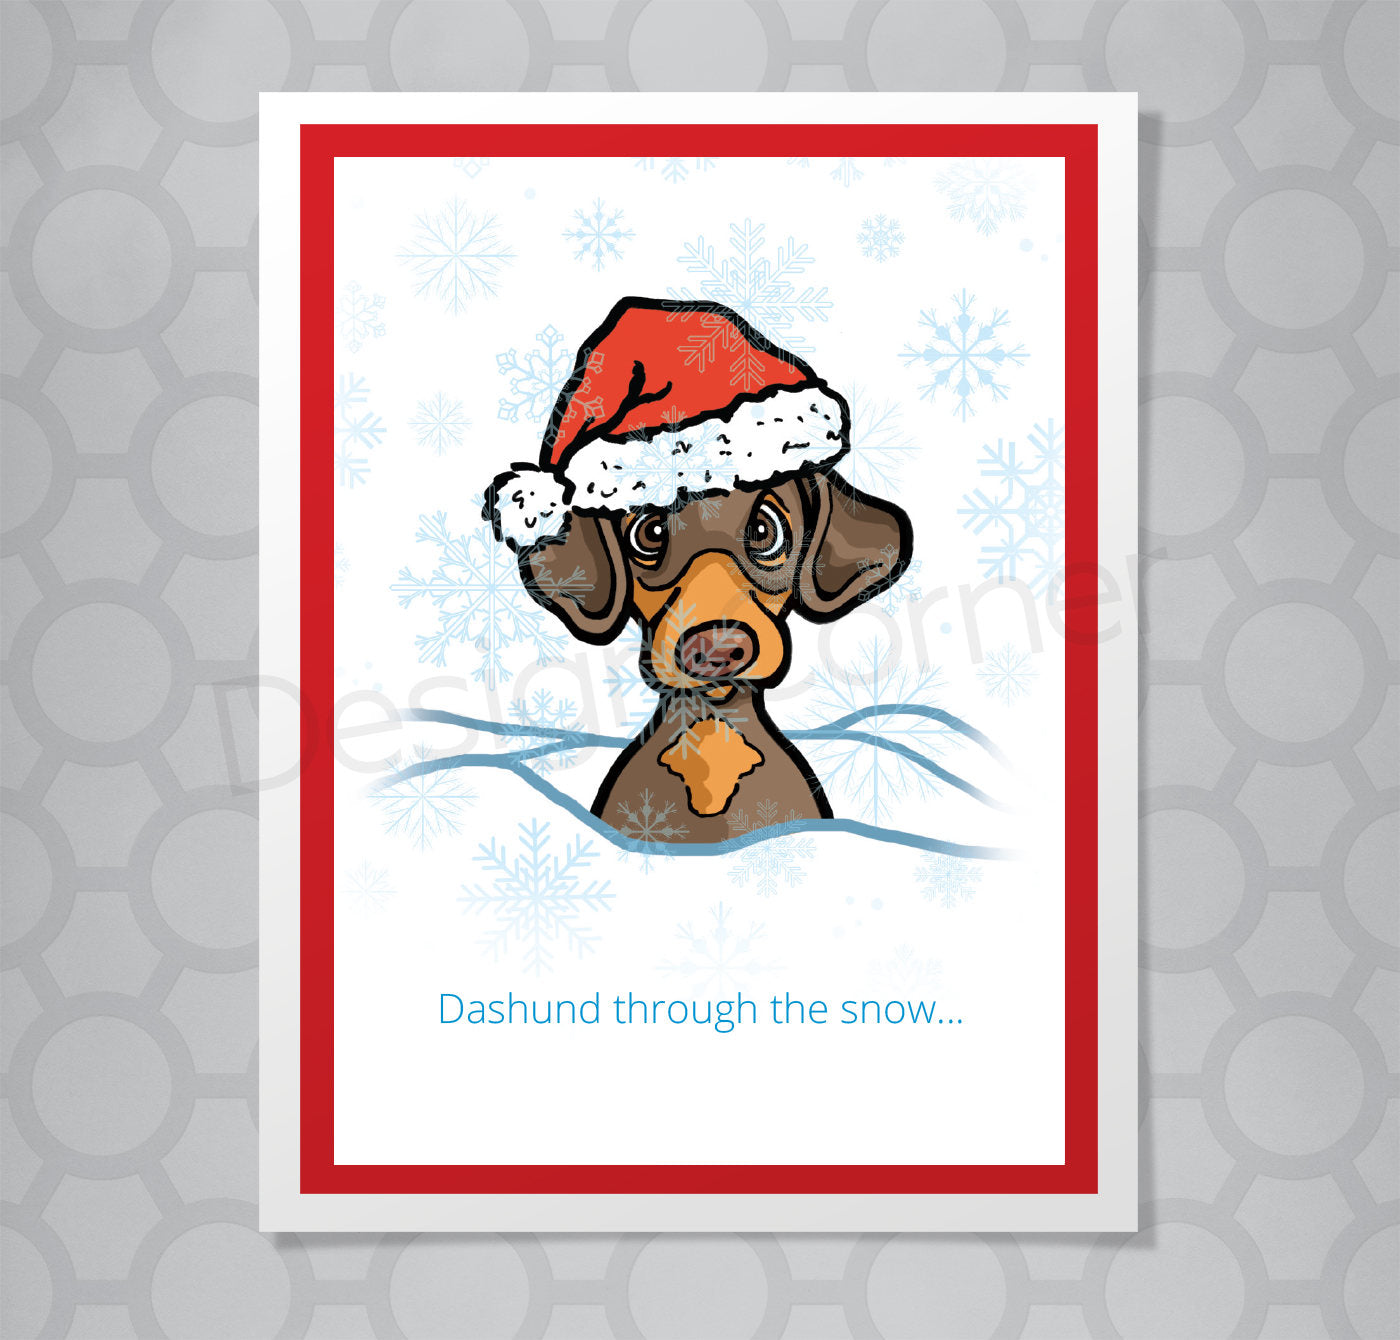 Illustration of Dashund dog in snowbank on a greeting card with caption "Dashund through the snow"